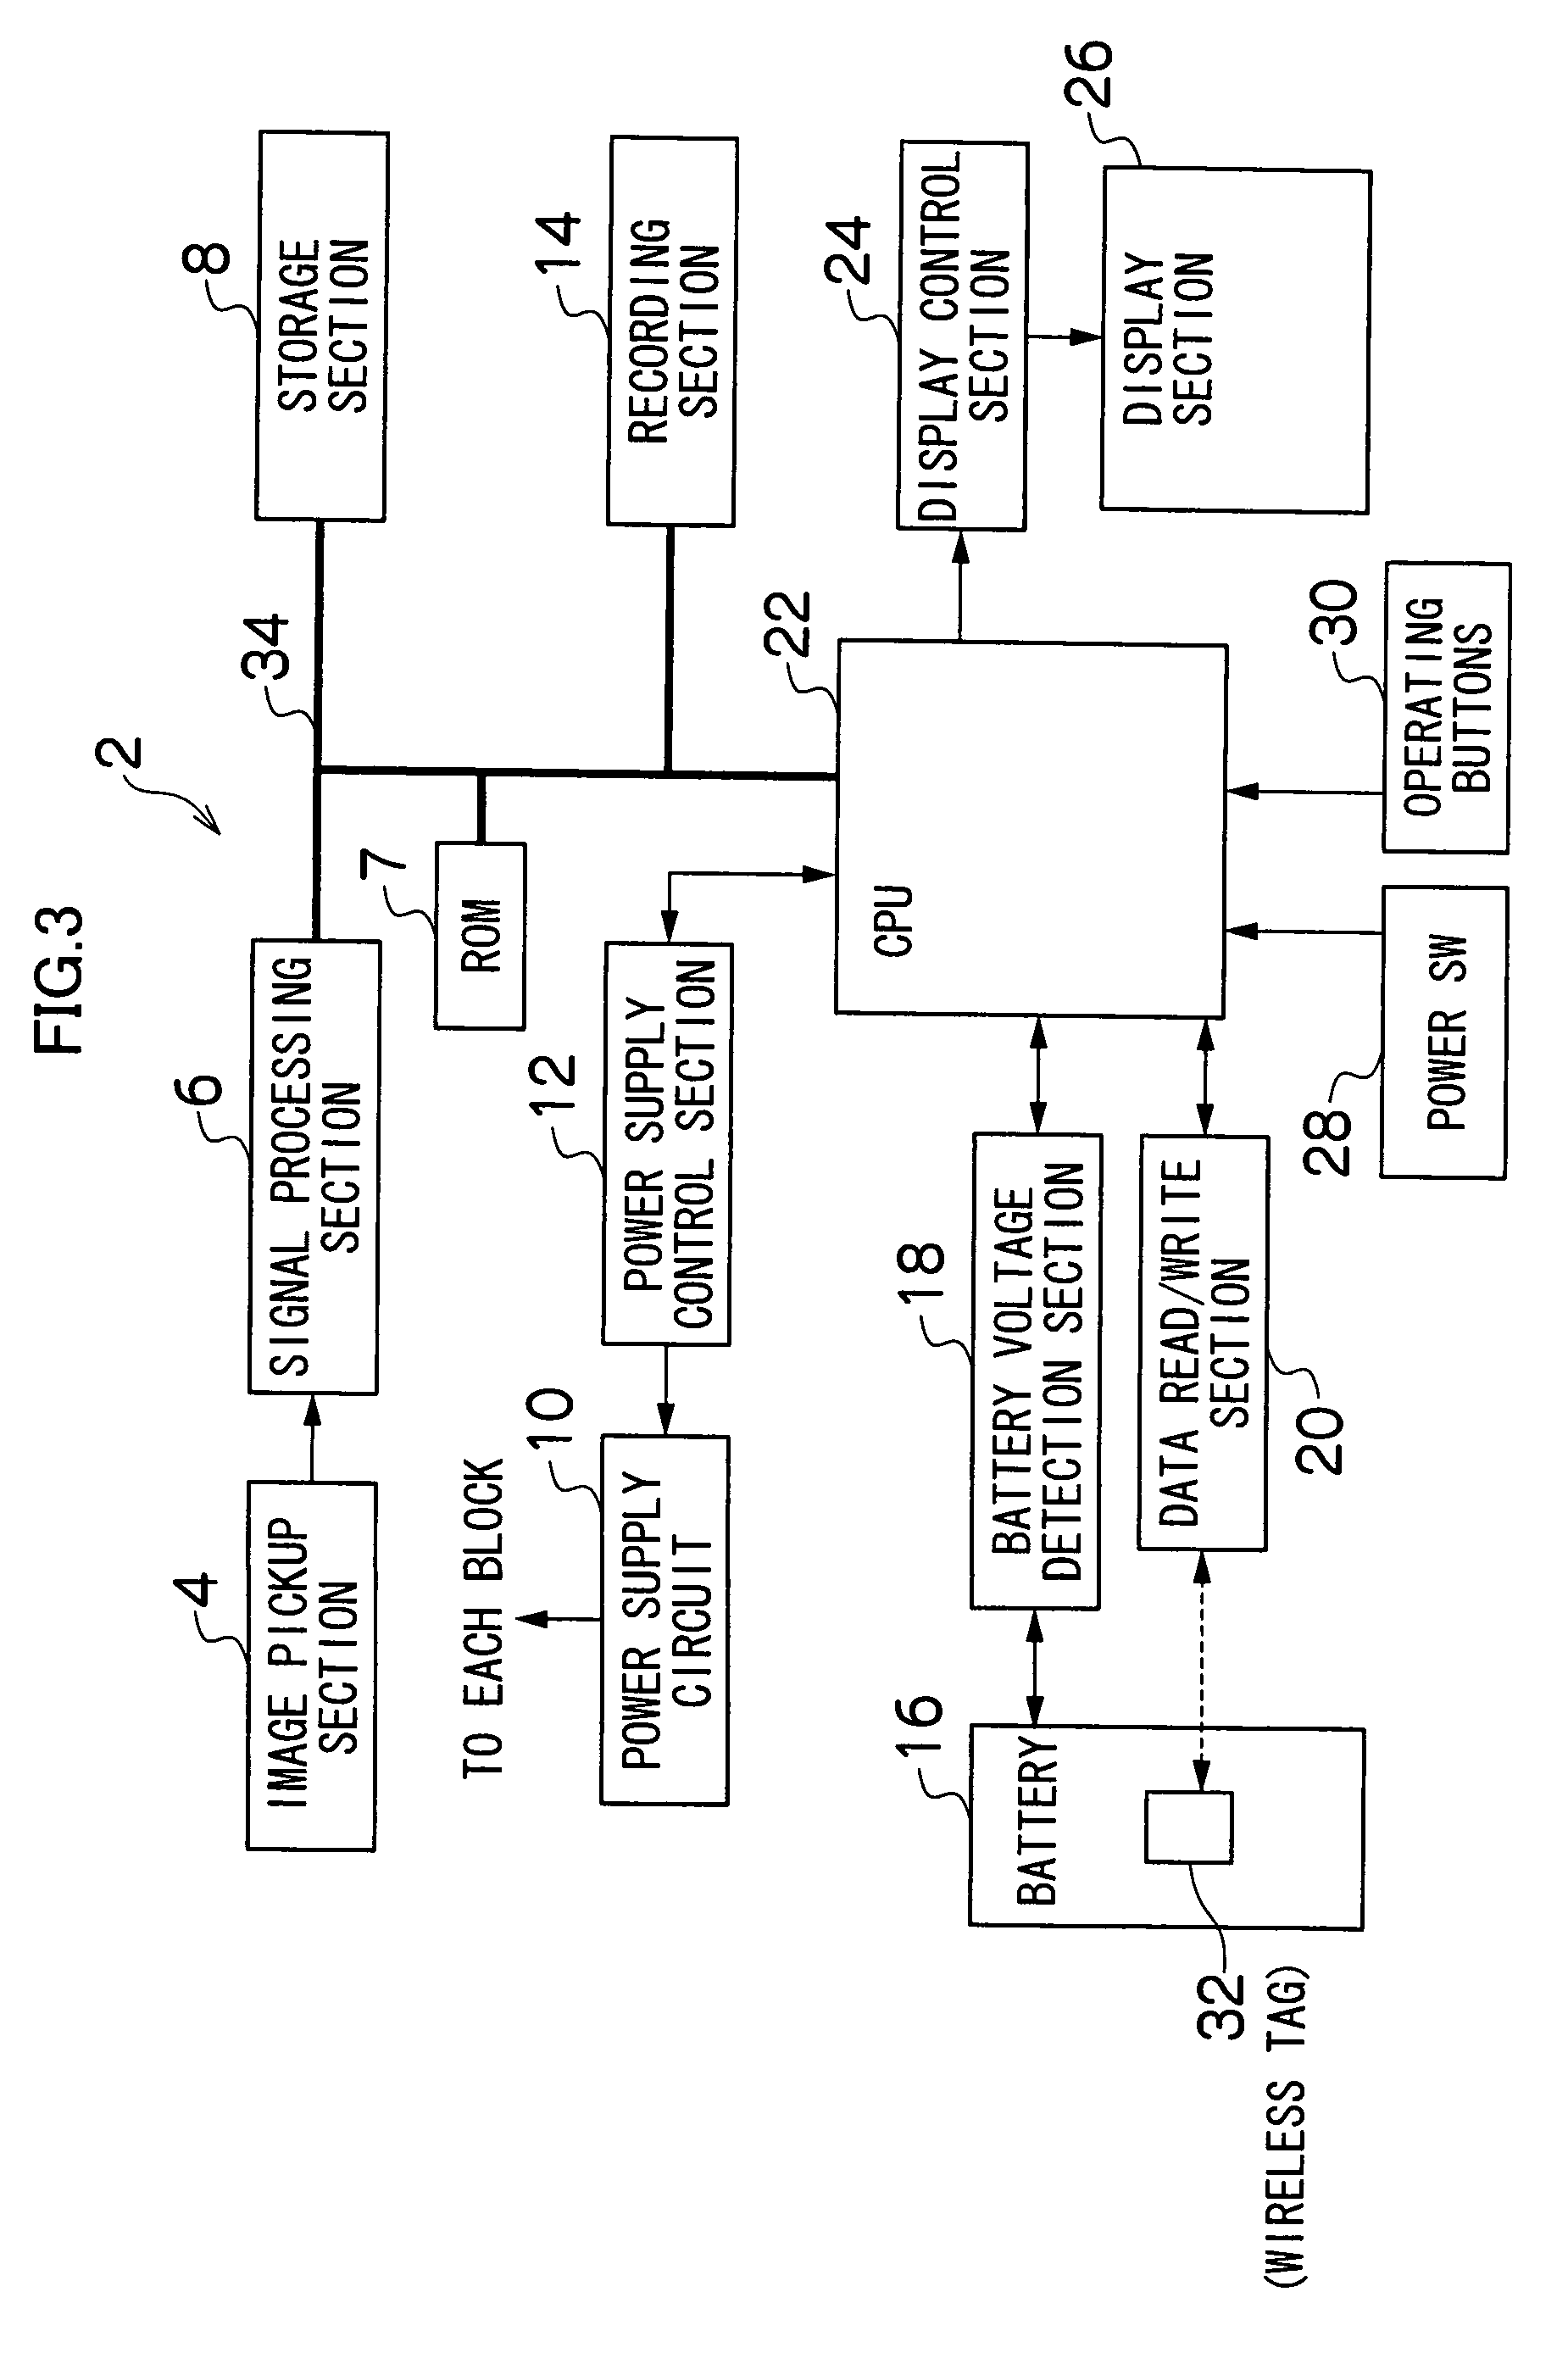 Portable electronic appliance with a battery having a wireless tag containing battery information